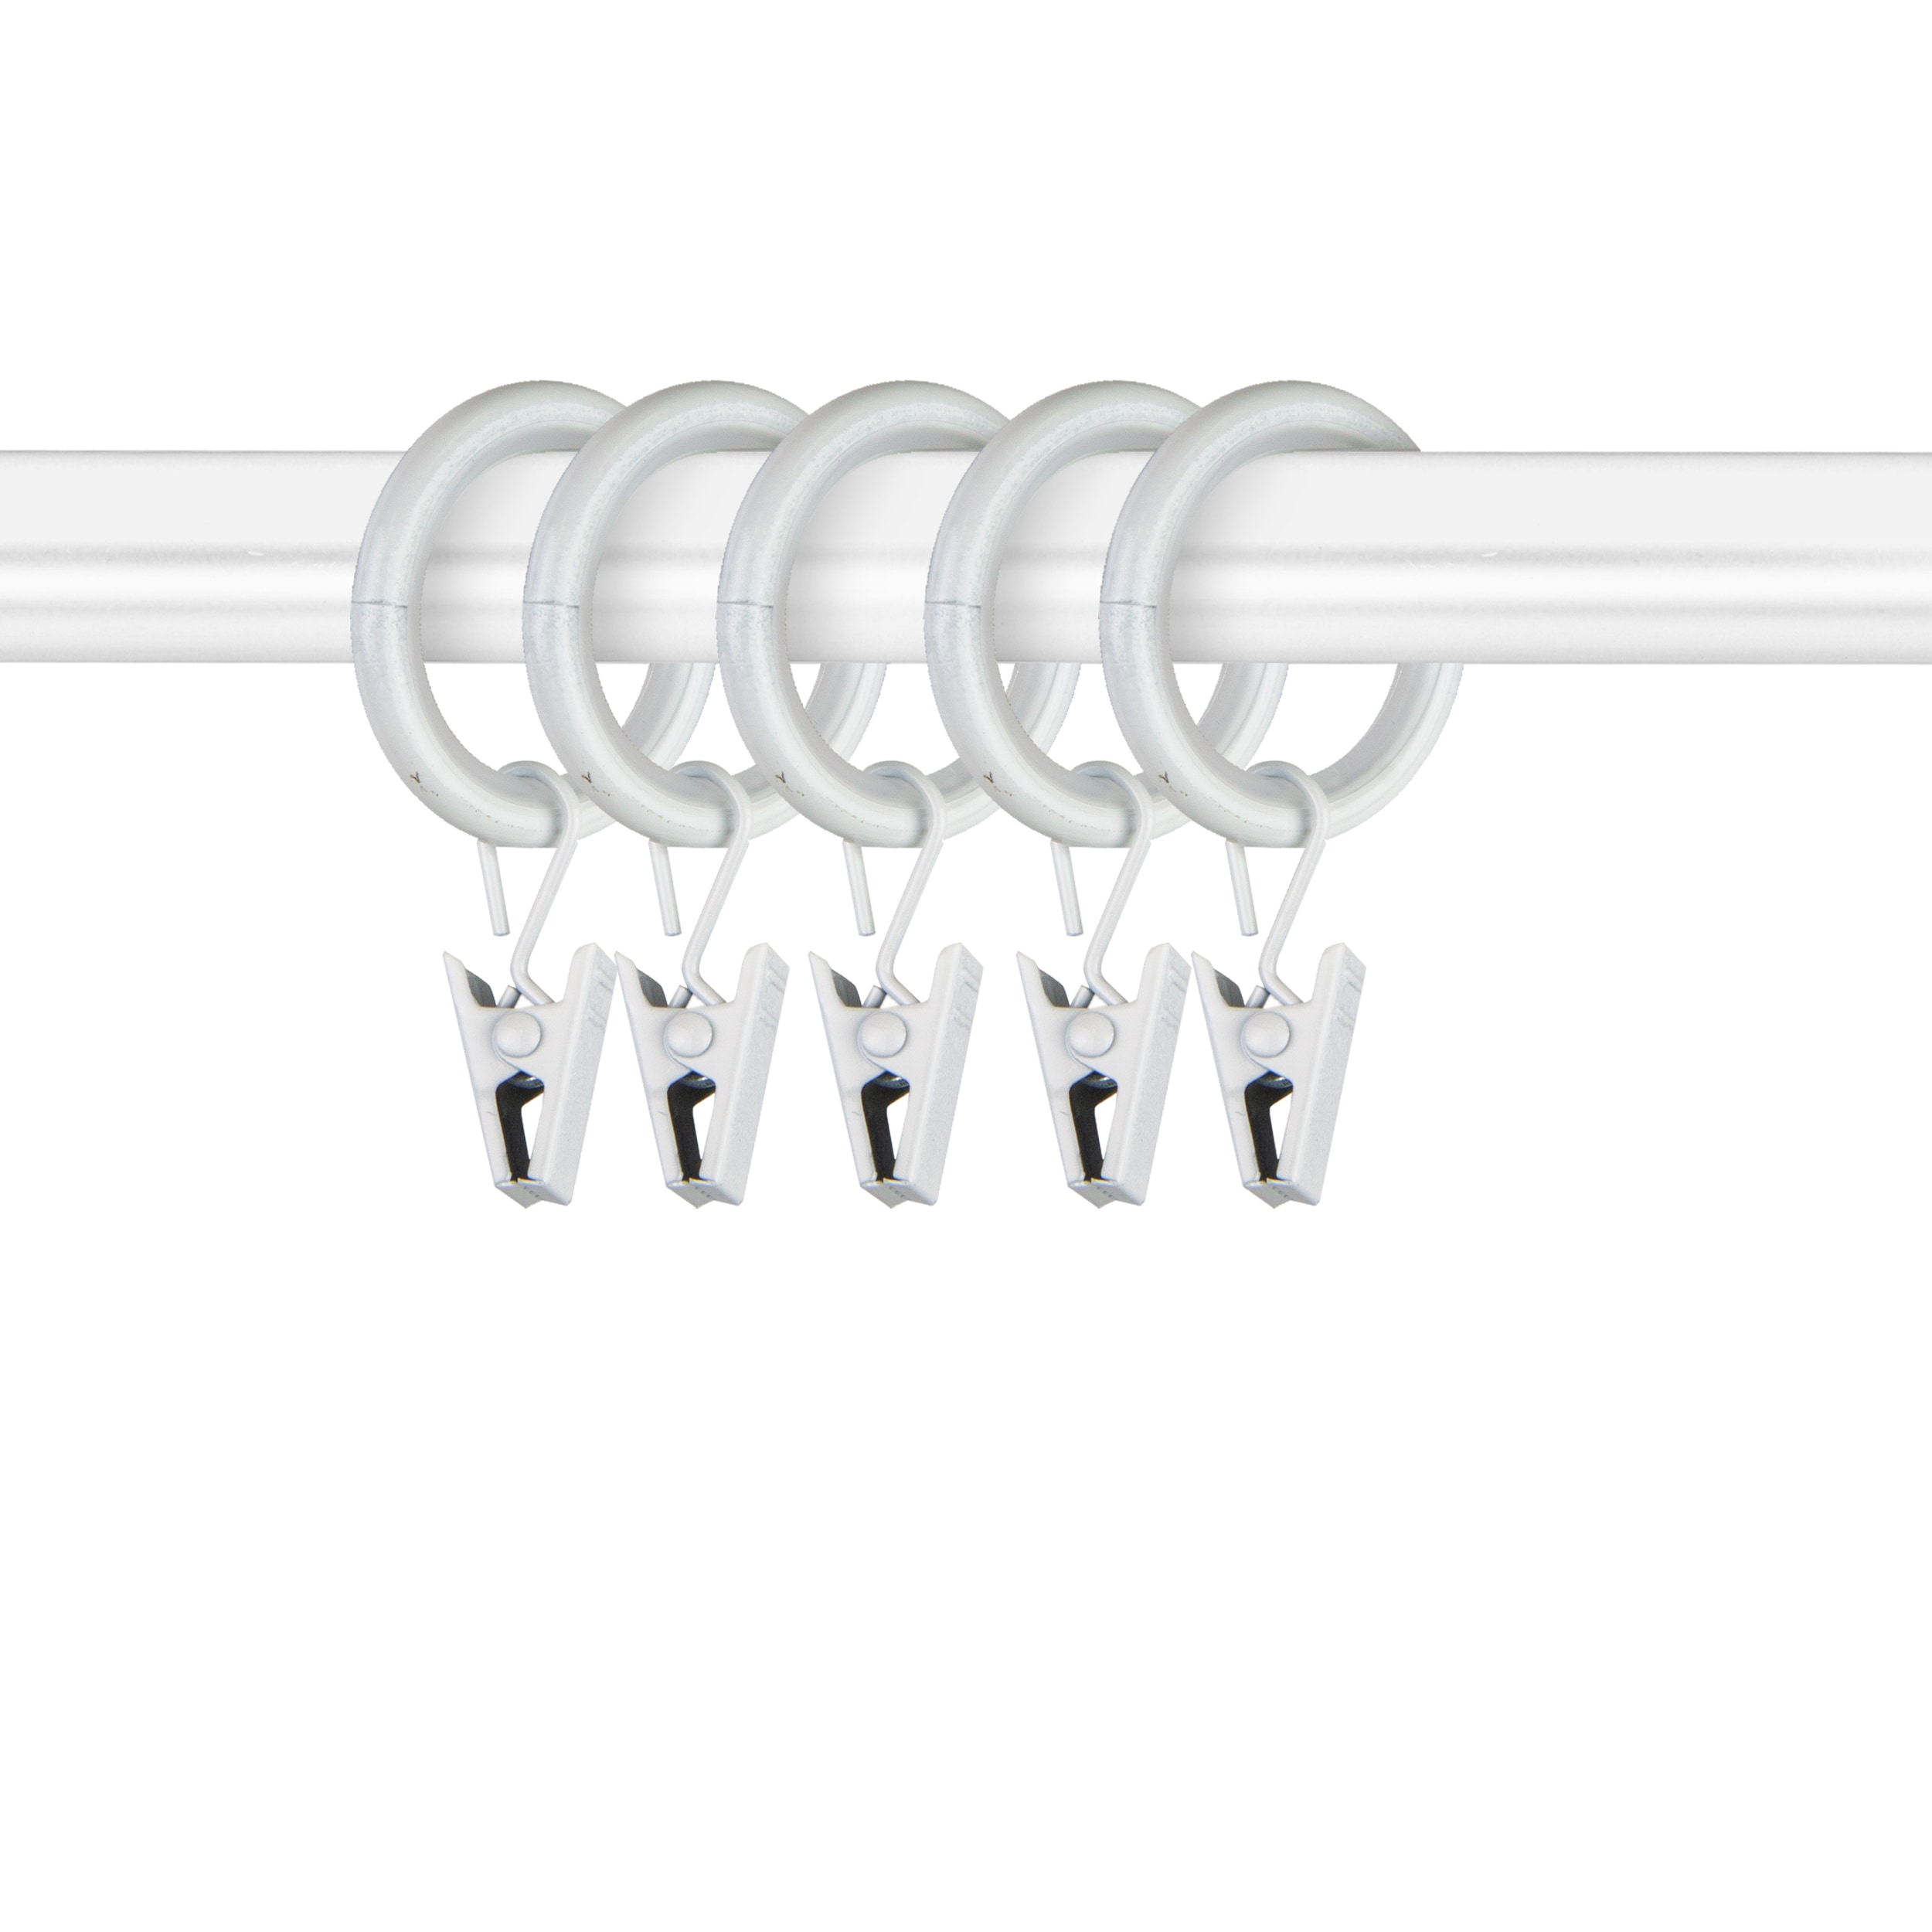 Amazon.com: 60 Pcs Metal Drapery Rings Curtain Ring and 60 Pcs Metal Curtain  Hook Pins Drapery Pins, 30 mm Internal Diameter Hanging Rings for Curtains  and Rods (White) : Home & Kitchen